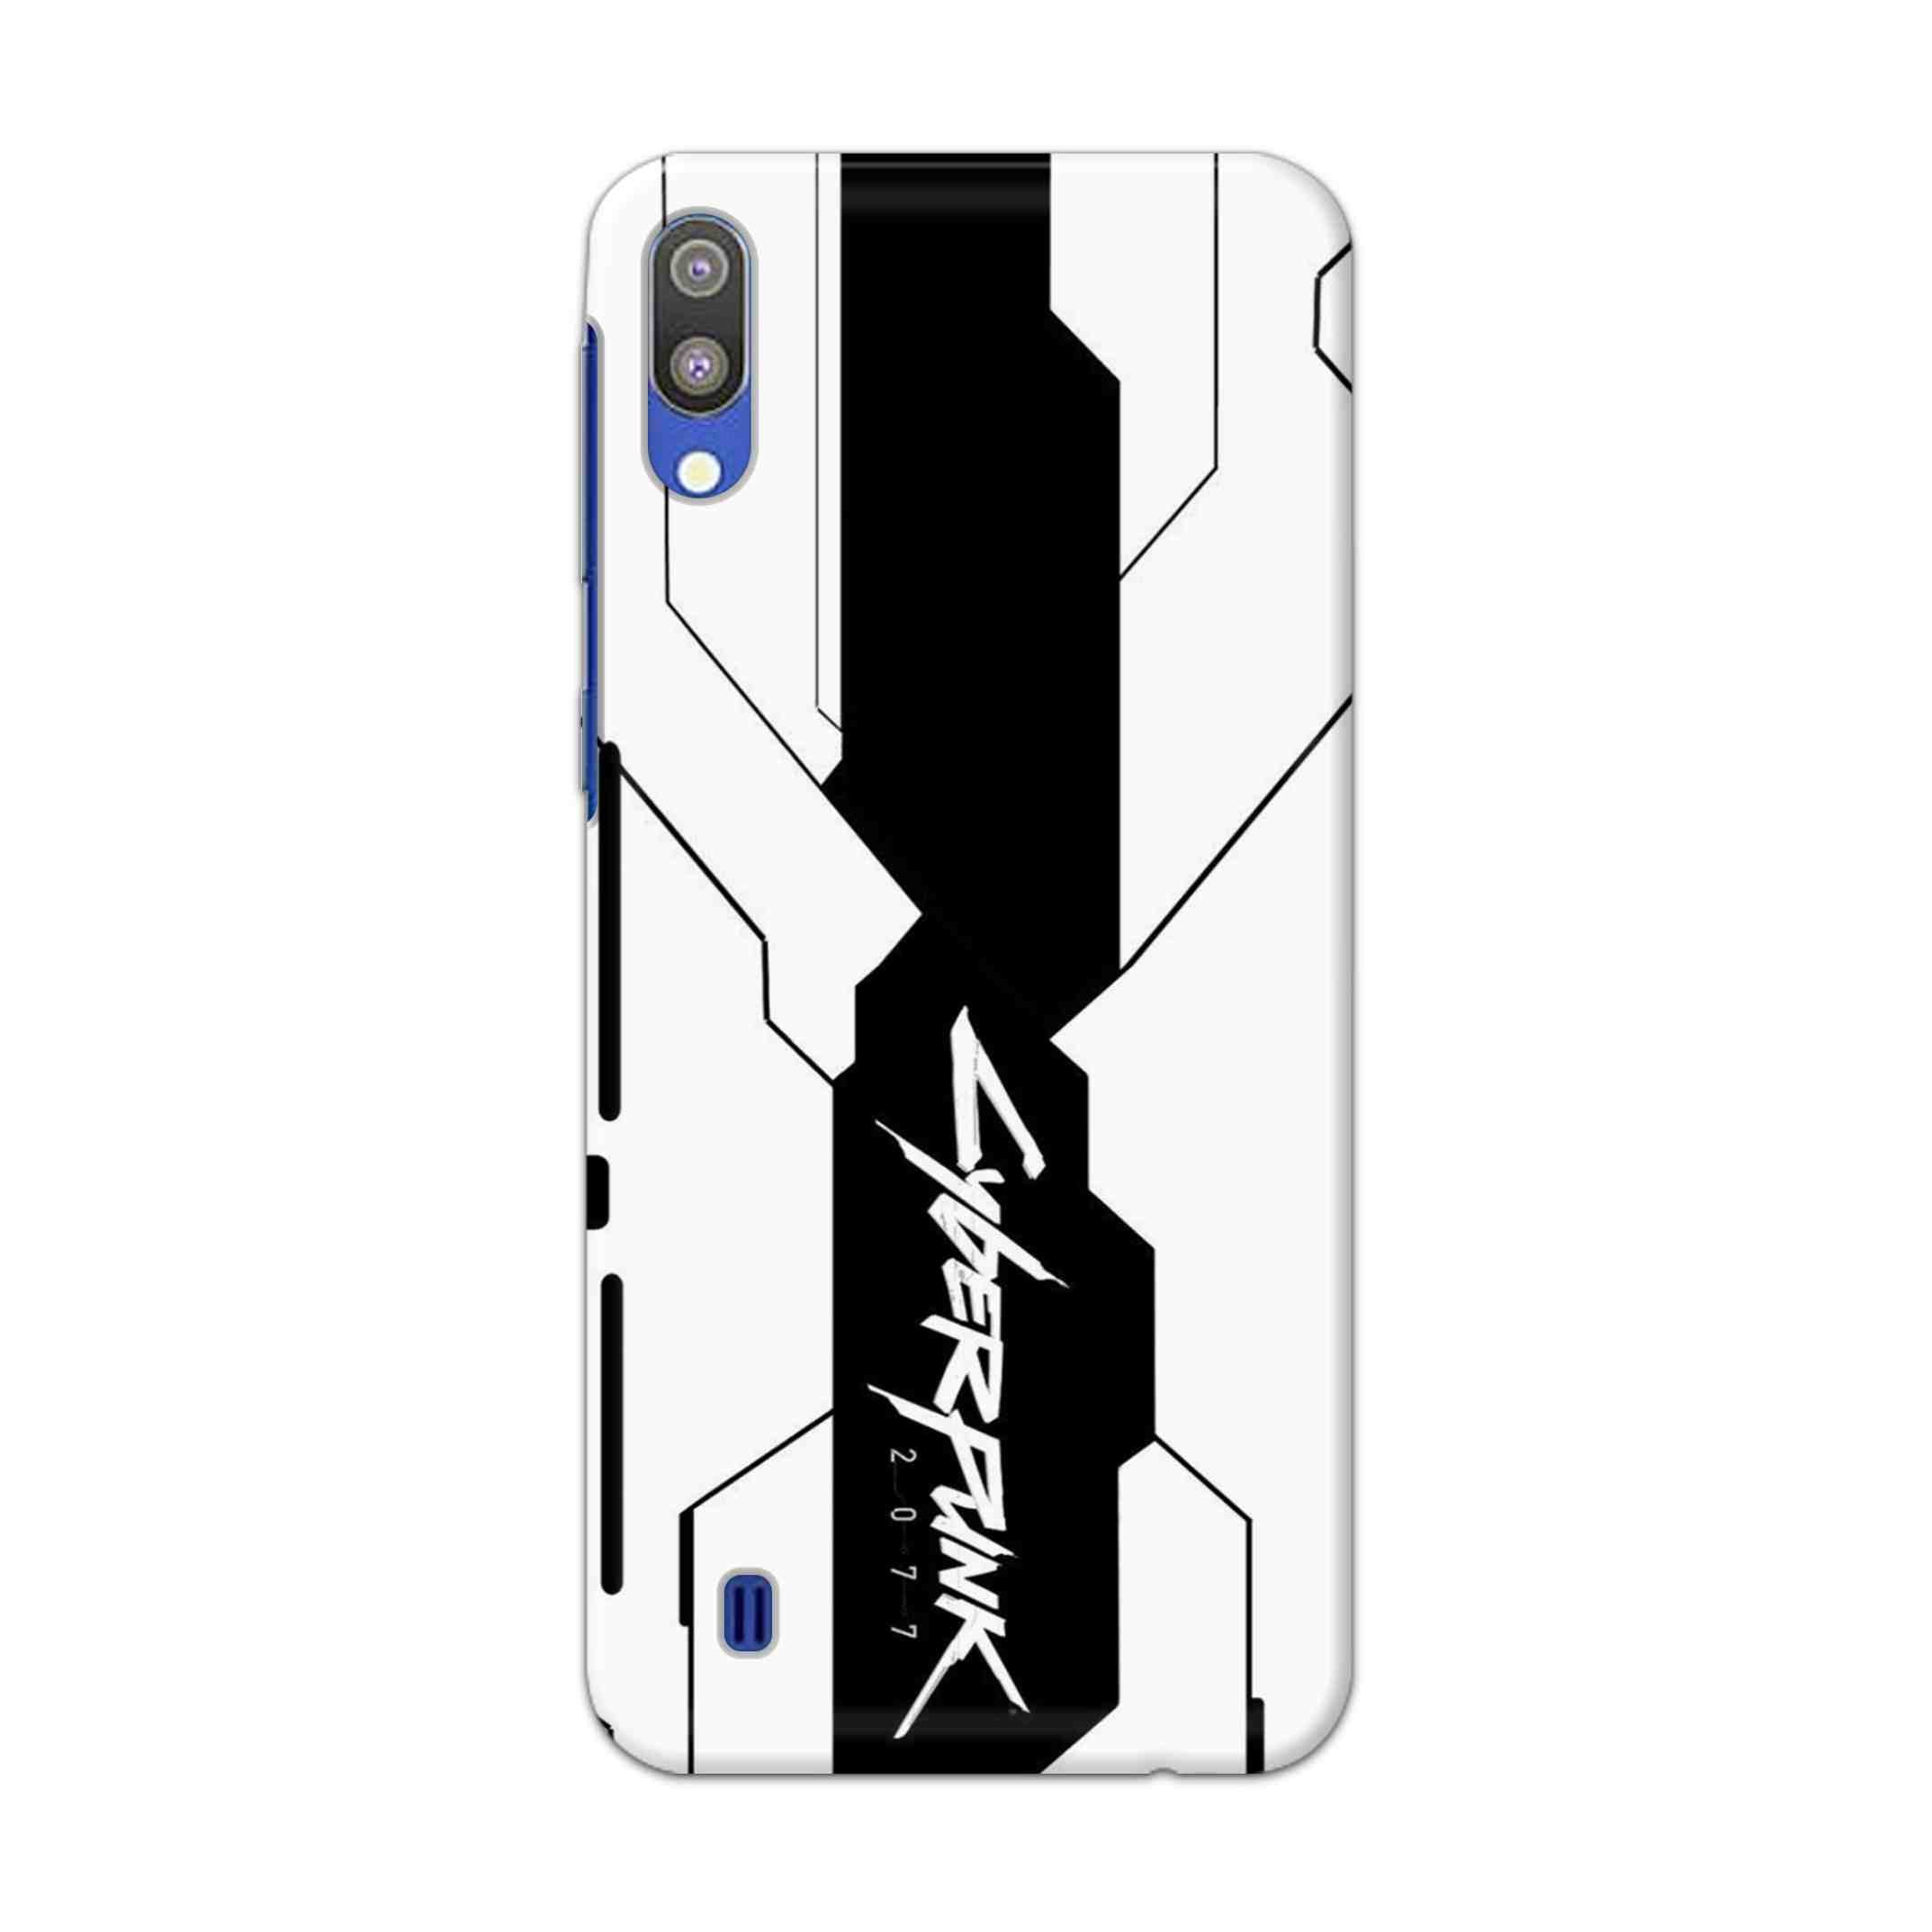 Buy Cyberpunk 2077 Hard Back Mobile Phone Case Cover For Samsung Galaxy M10 Online